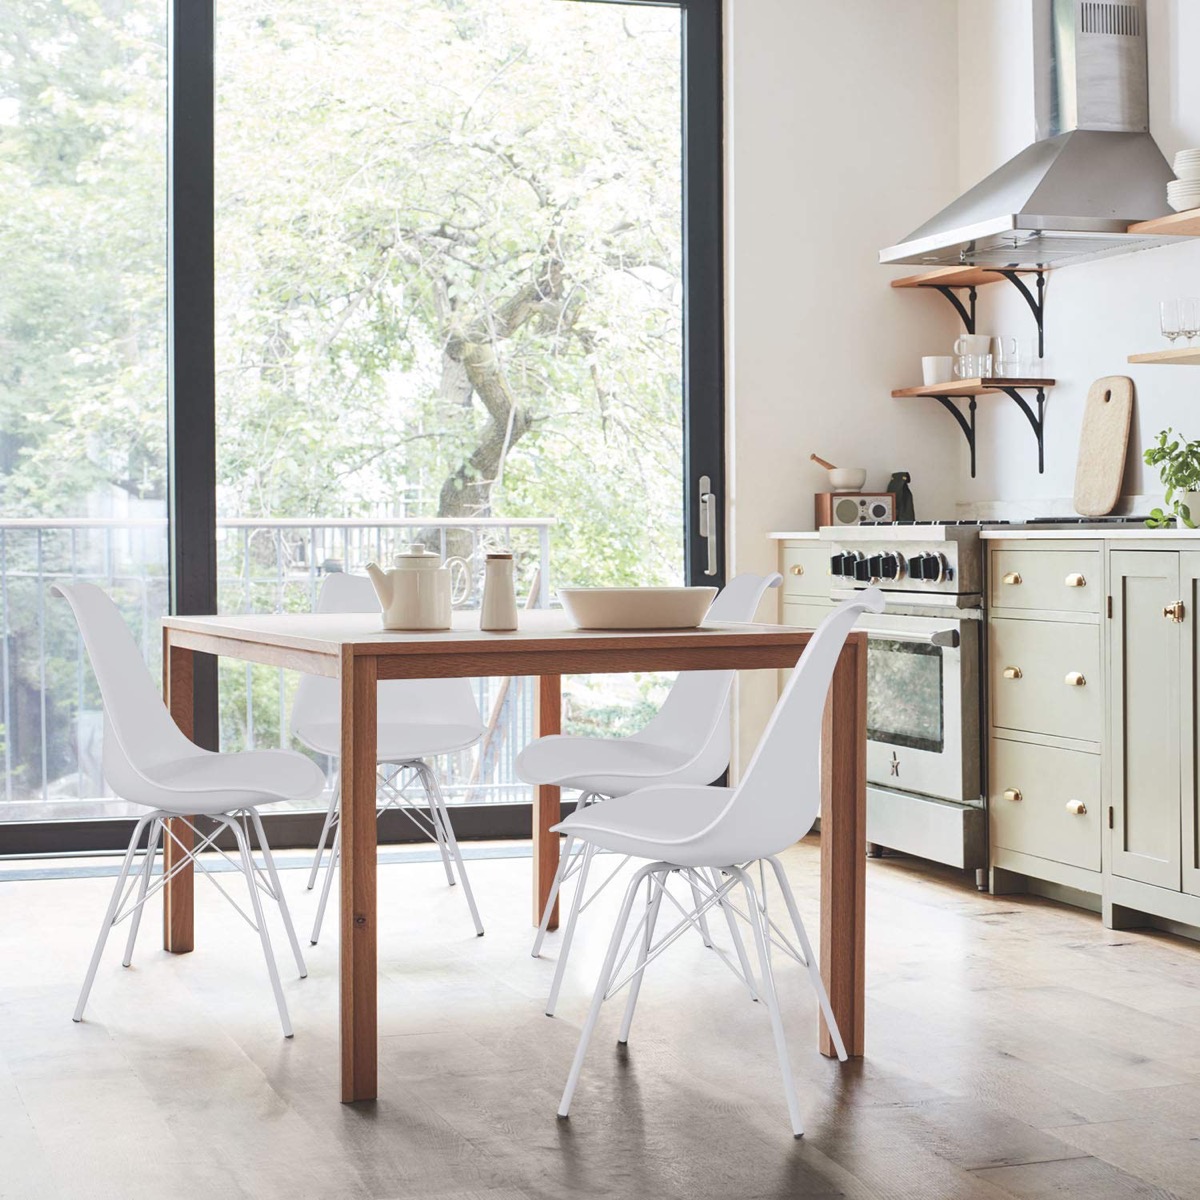 51 Kitchen Chairs To Instantly Update, Kitchen And Dining Room Tables Chairs